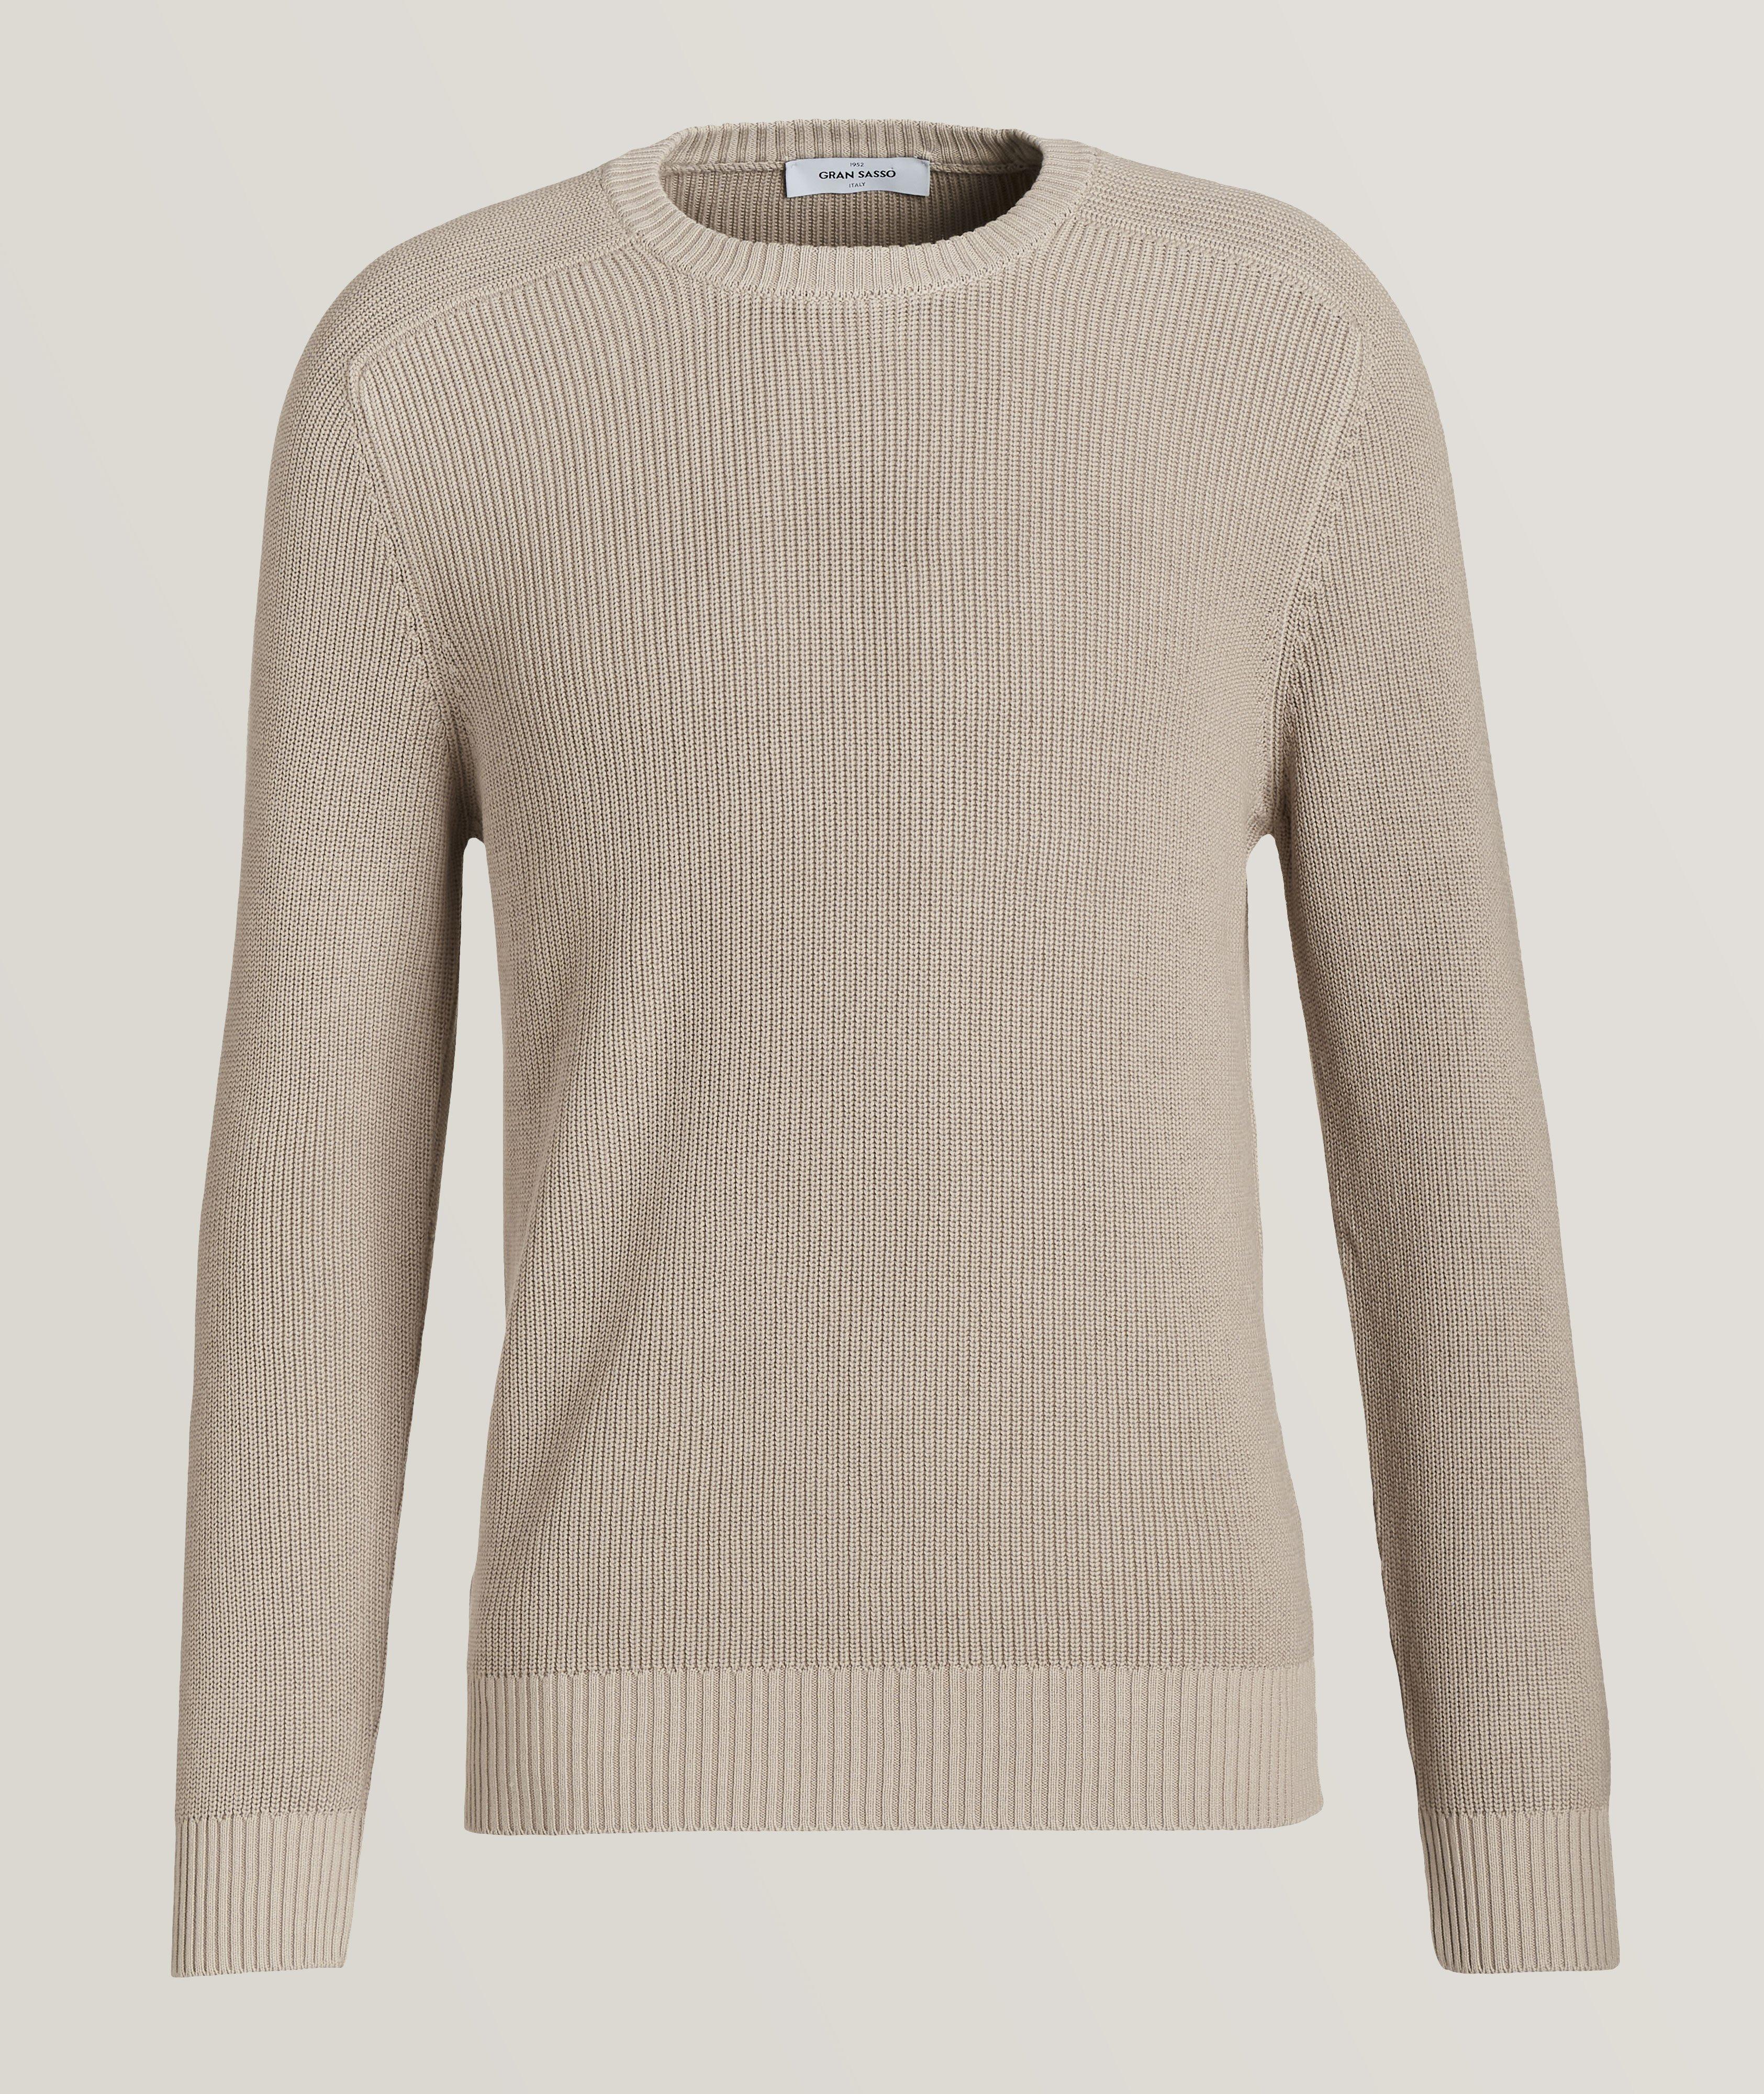 Ribbed Knit Cotton Crew Neck Sweater image 0